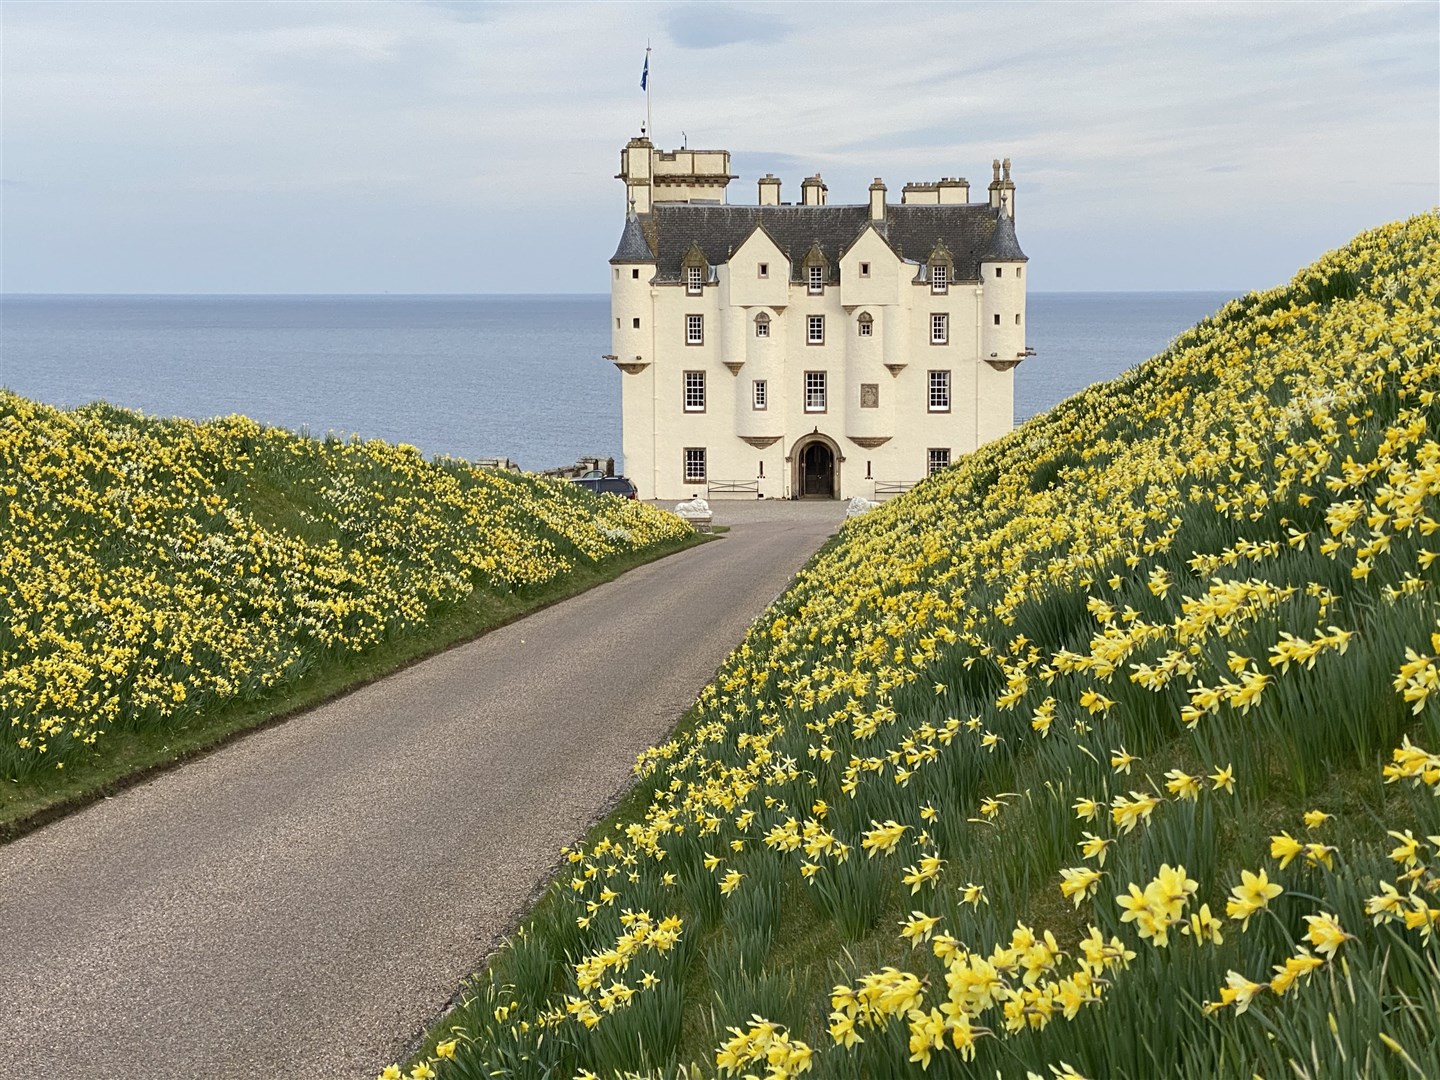 Dunbeath Castle is described by Savills as 'an exceptional and historic family home'.